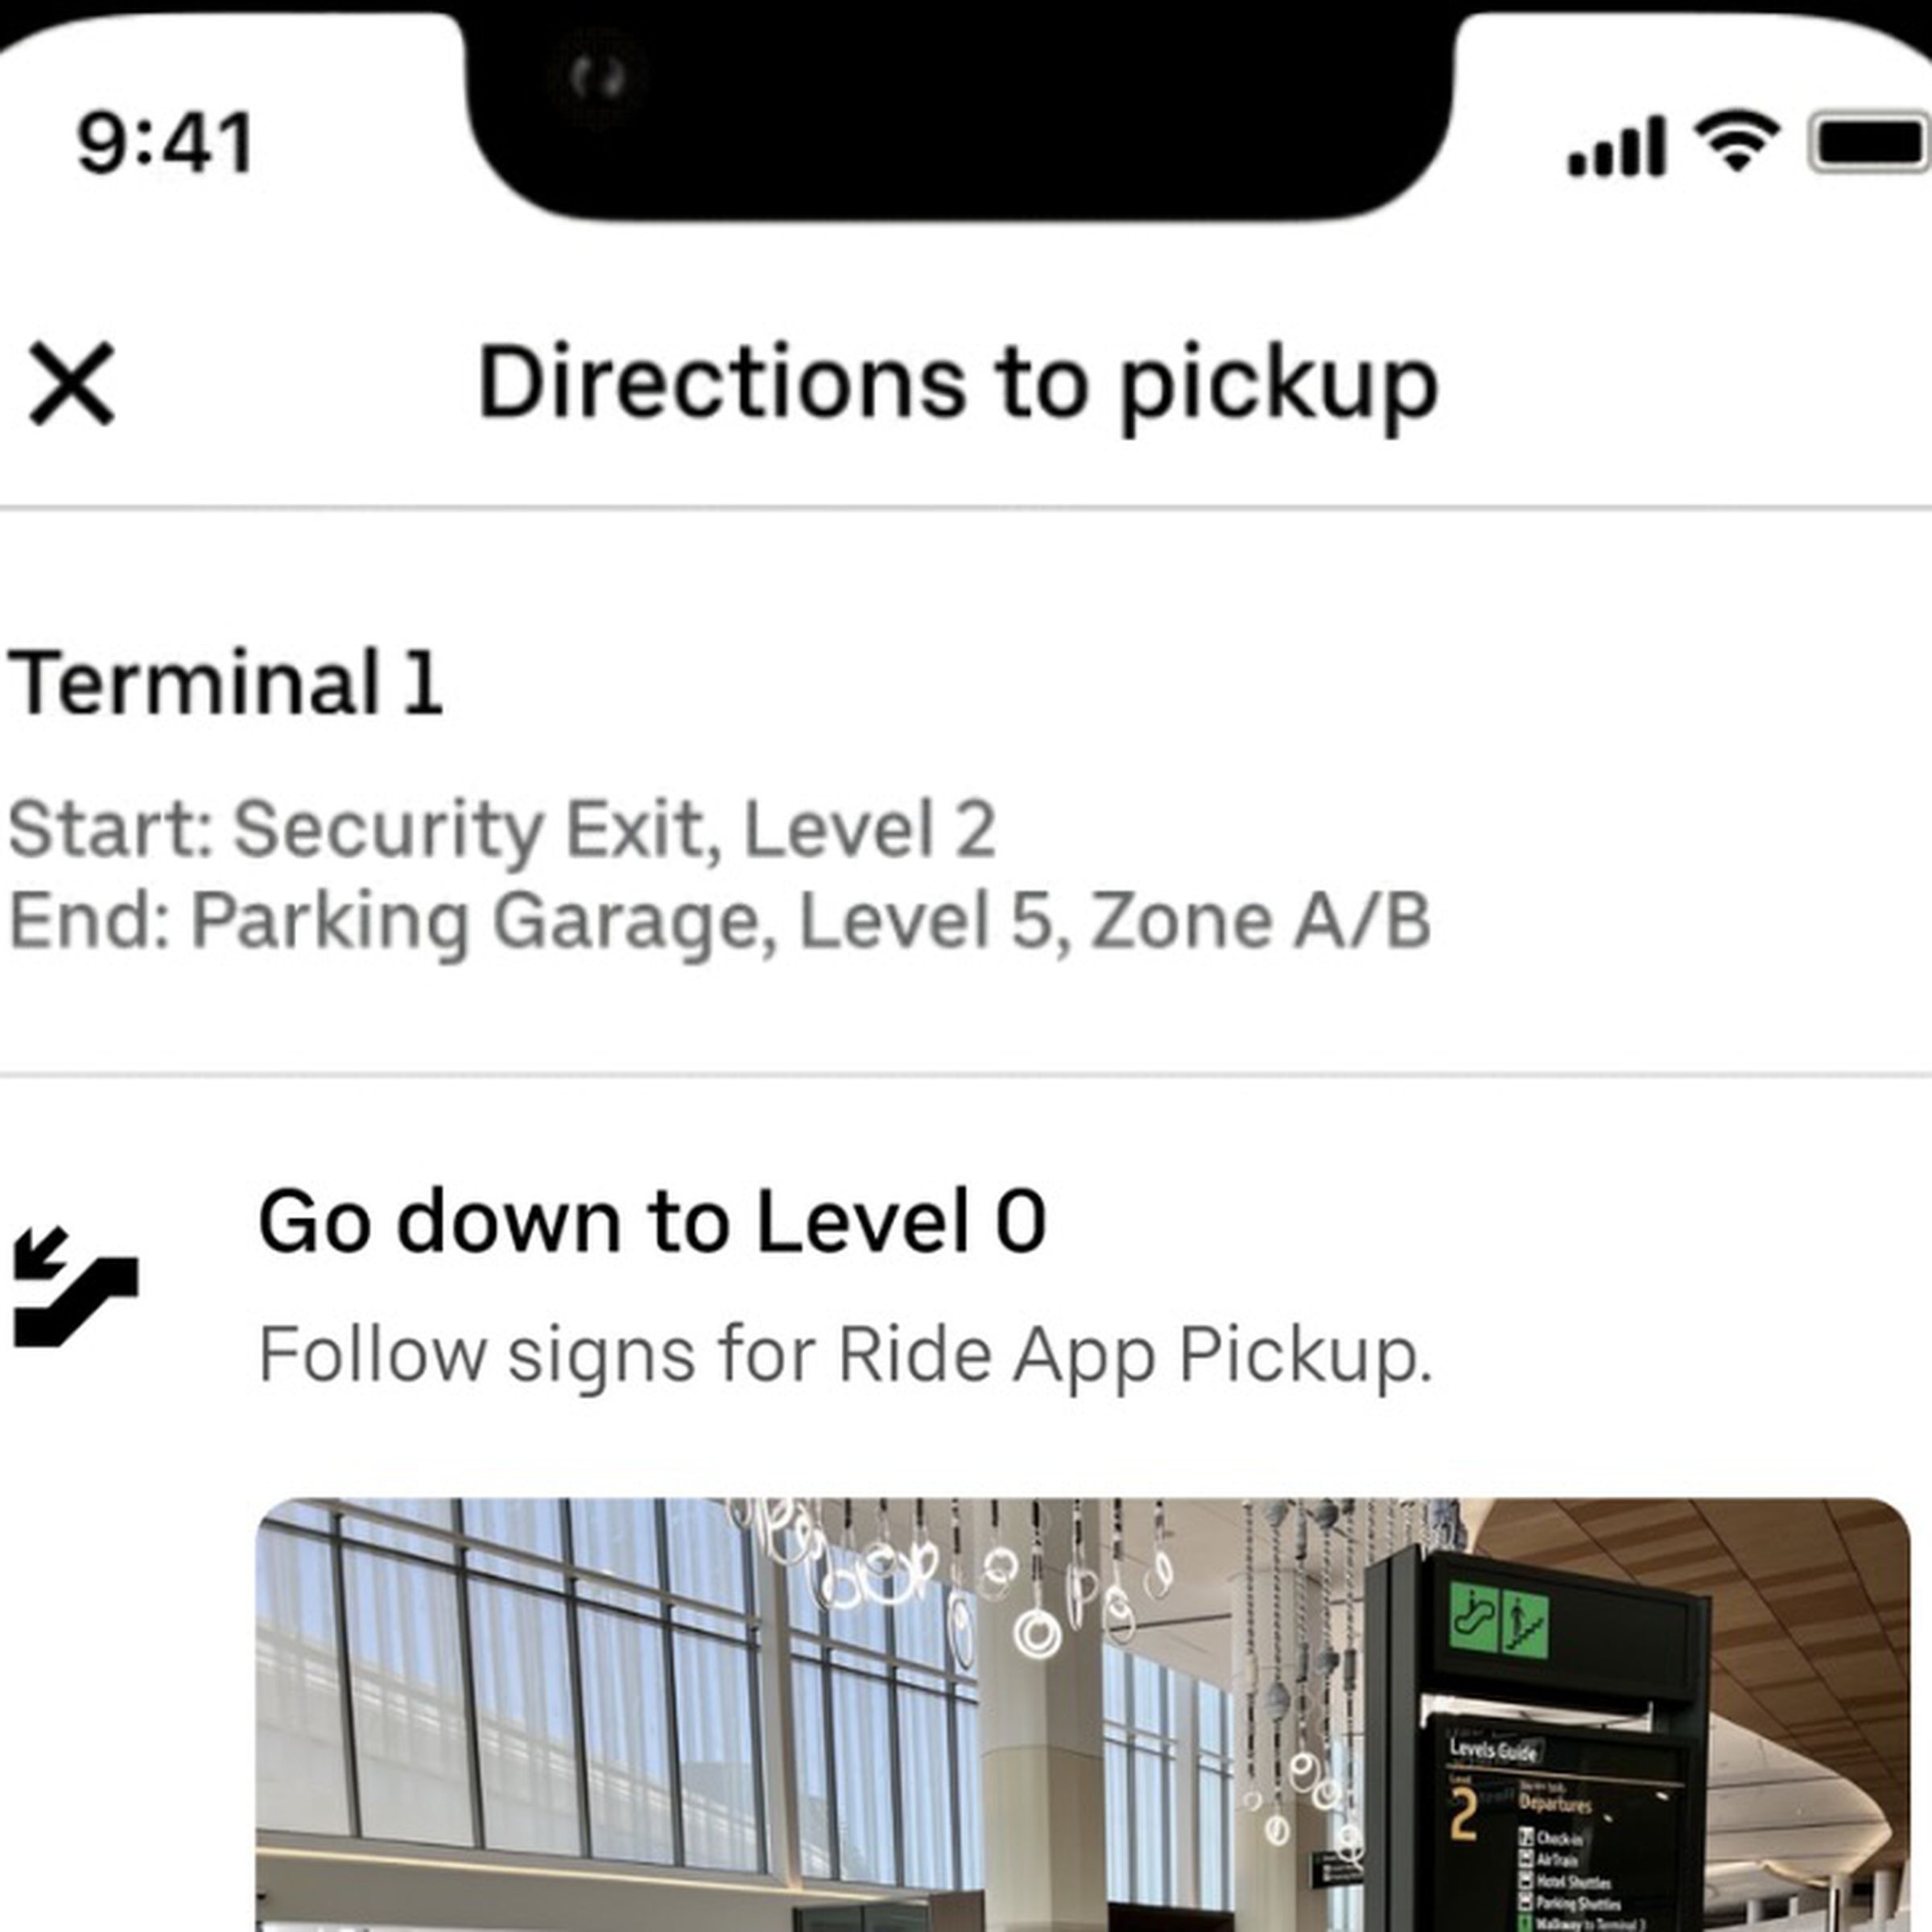 Uber app on an iPhone showing directions to pickup. The instructions for terminal 1 start at security exit, level 2 abd end at parking garage level 5 zone A B.